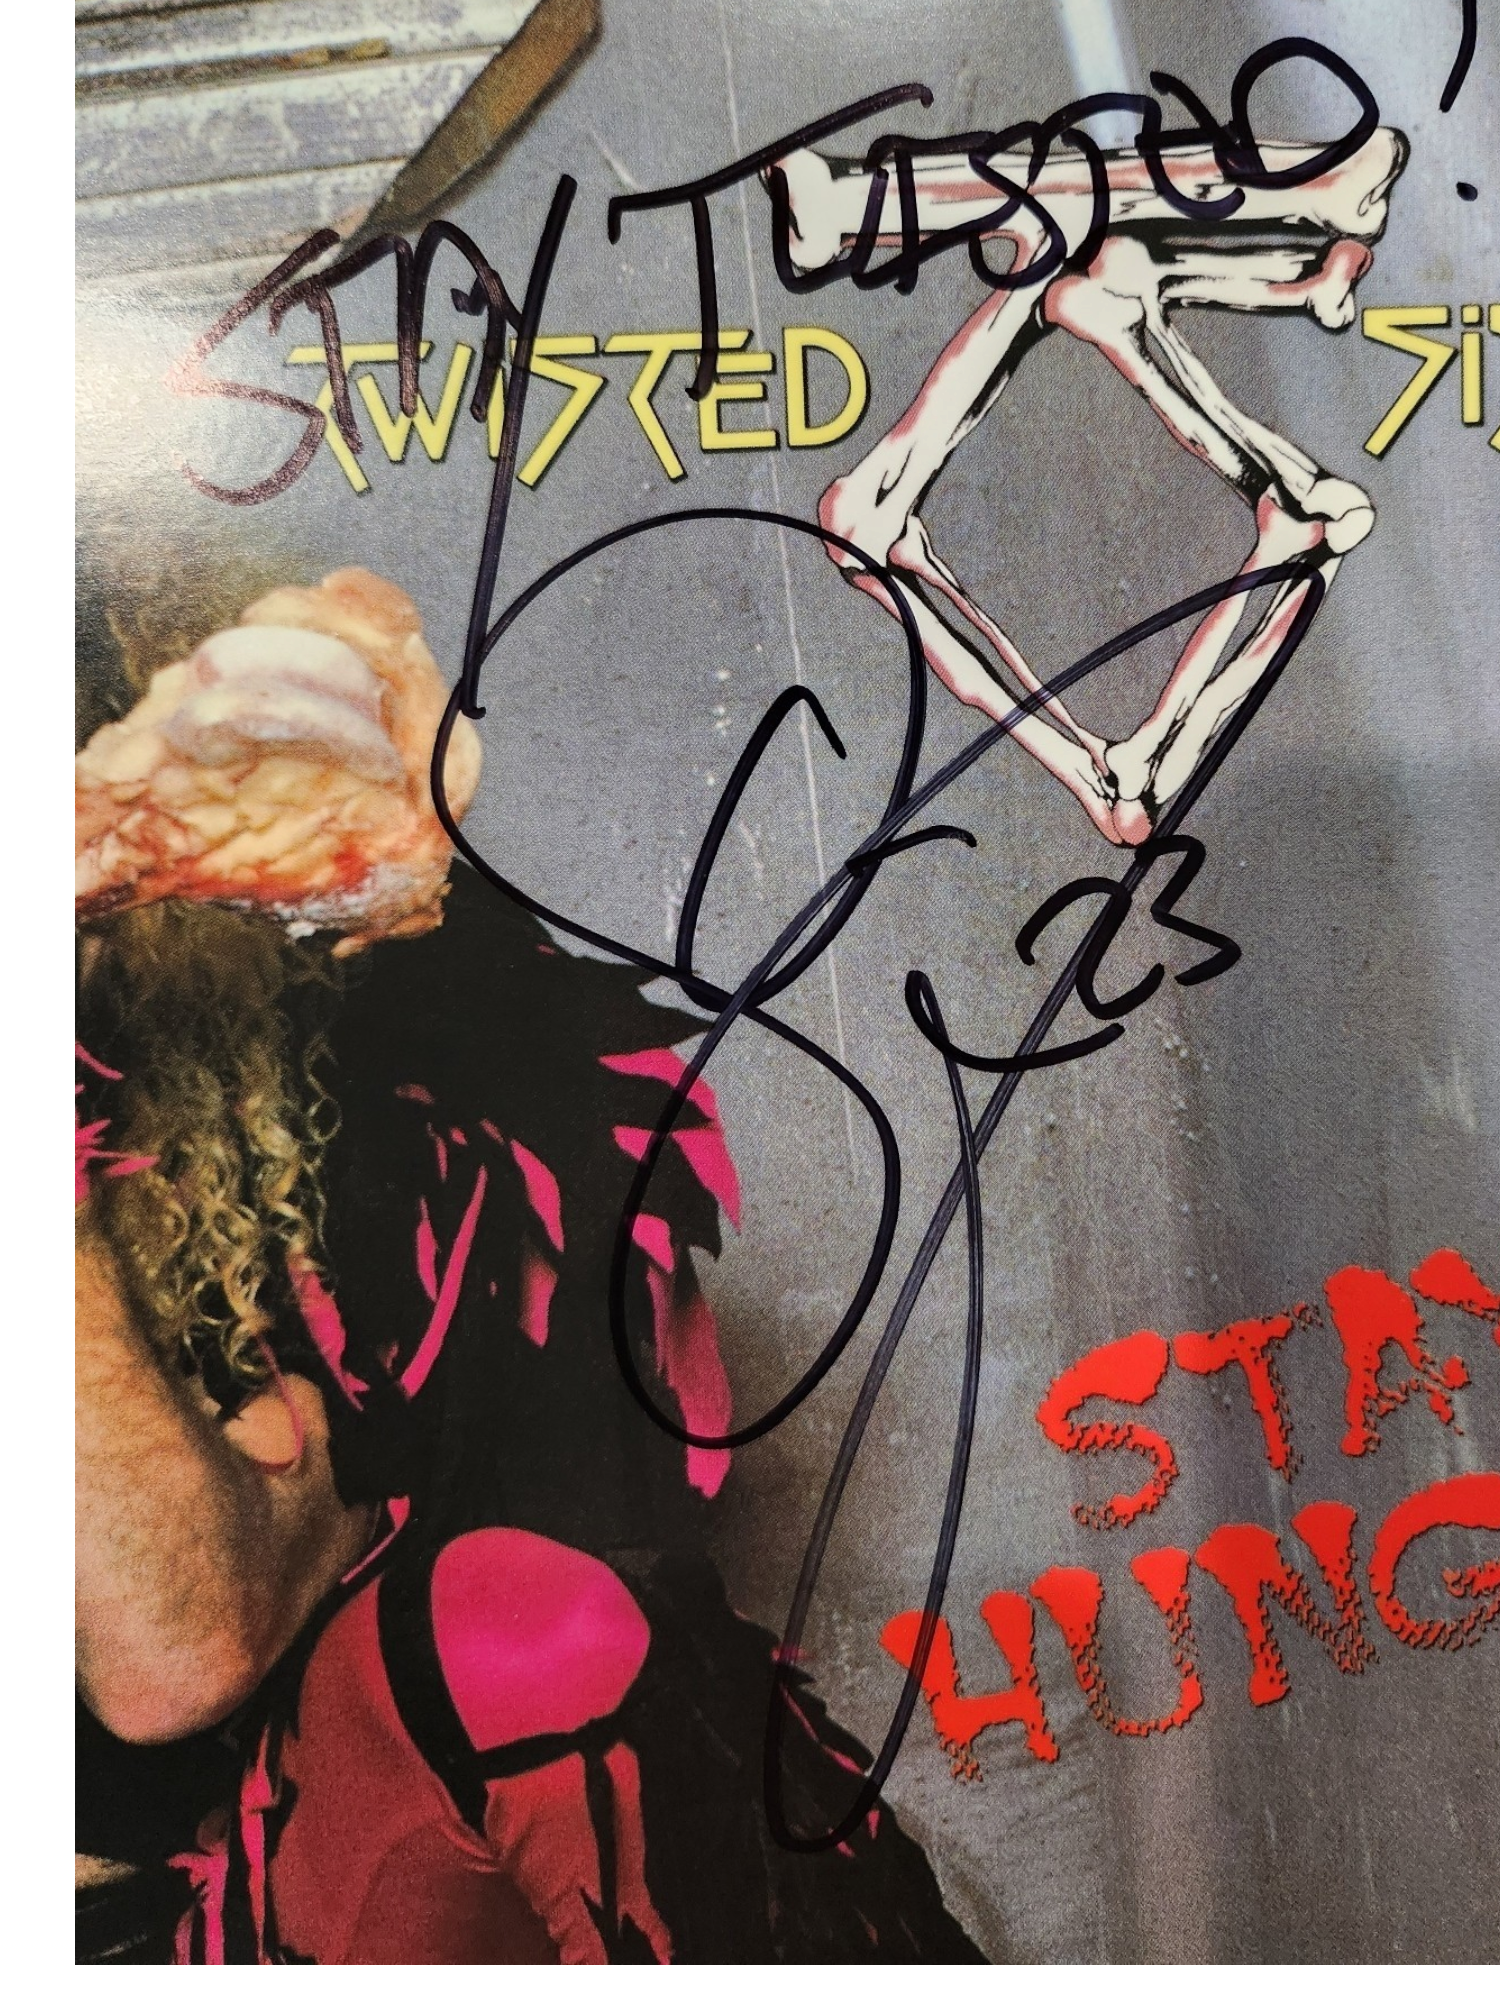 Stay Hungry Twisted Sister Vinyl Signed by Dee Snider w inscription "Stay Twisted"